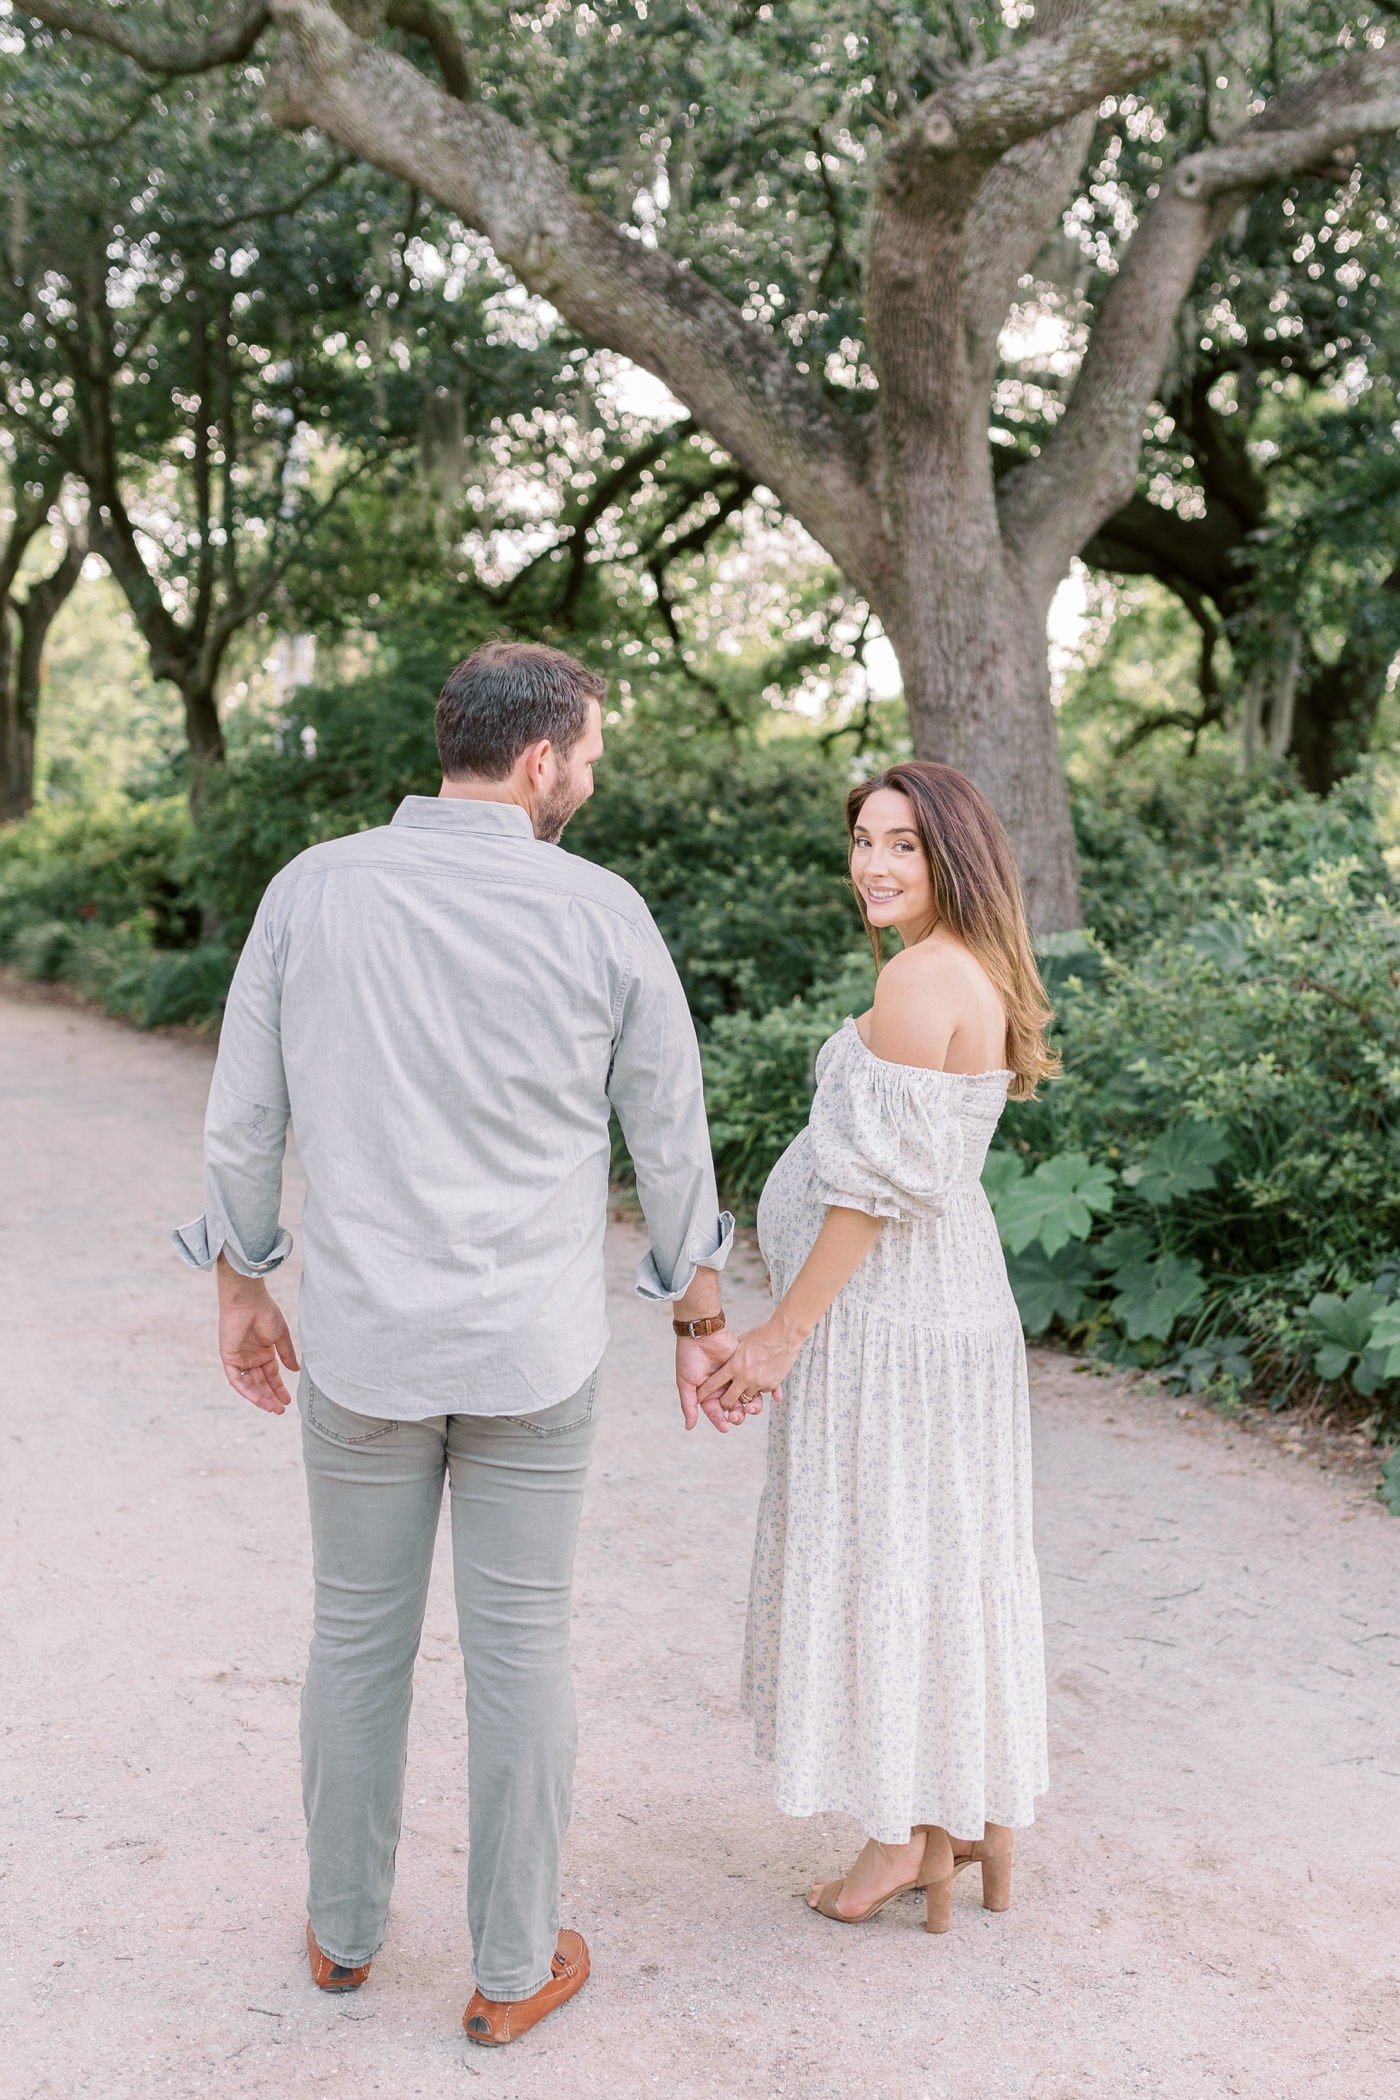 Mom and dad to be walking through a park in Charleston, SC | Photo by Caitlyn Motycka Photography.